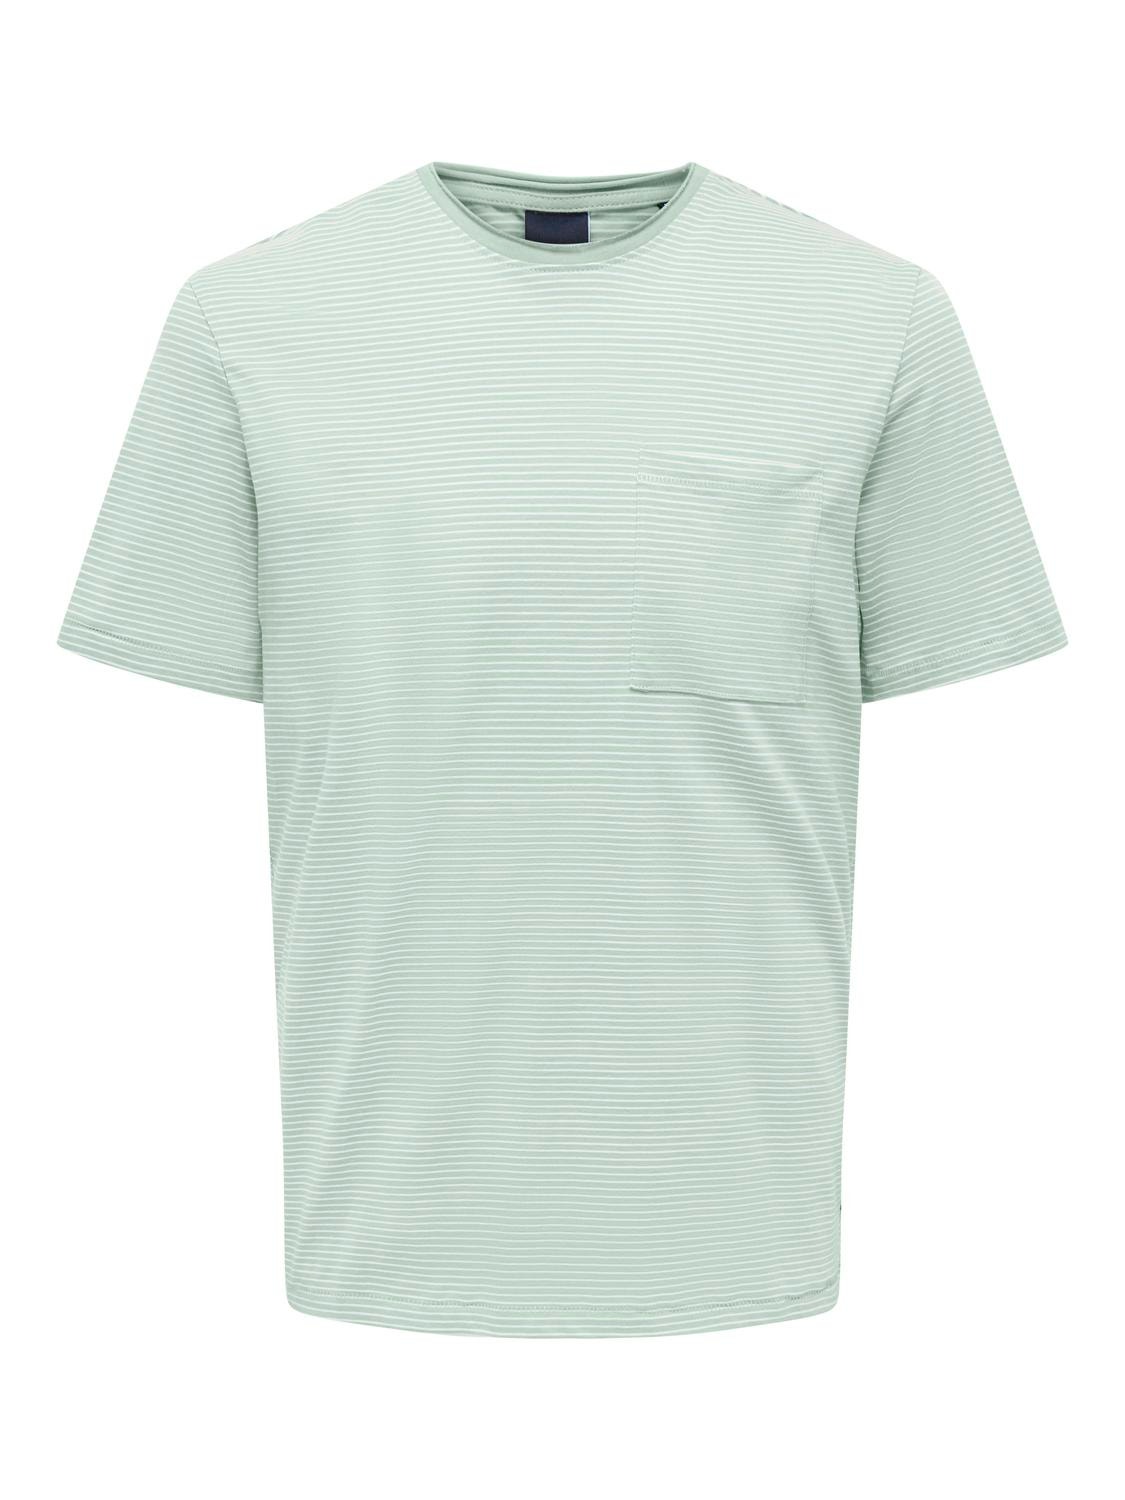 ONLY & SONS Regular Fit Round Neck T-Shirt -Surf Spray - 22025680